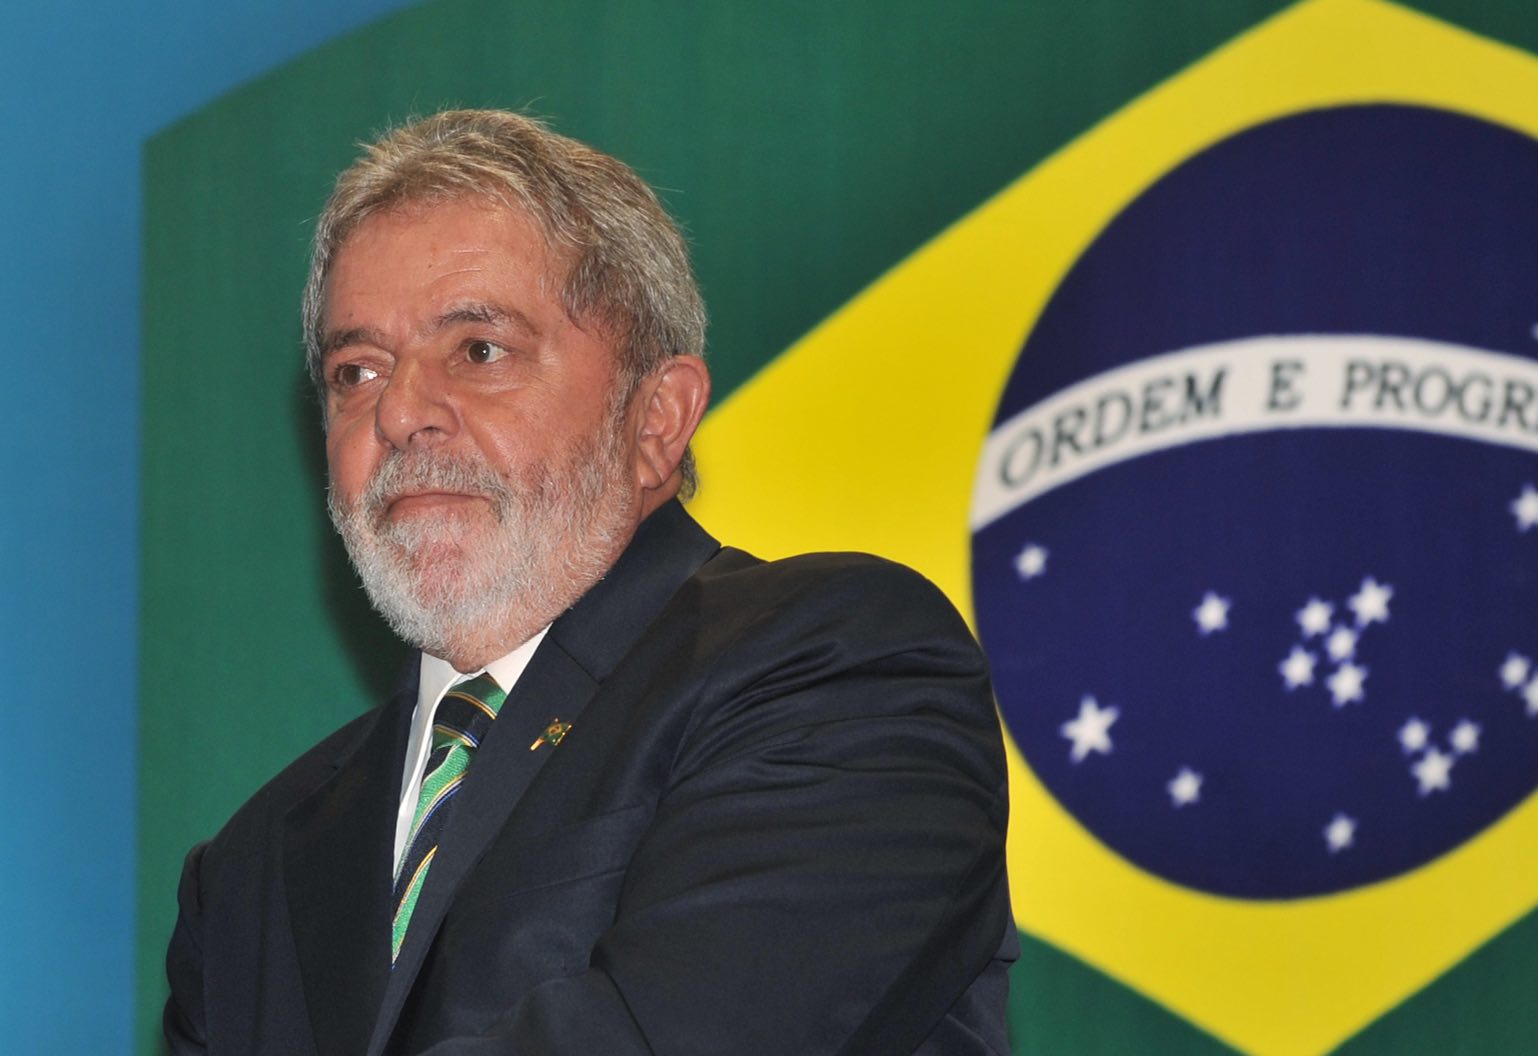 Brazil's former president Lula charged in widening Petrobras corruption  scandal, The Independent